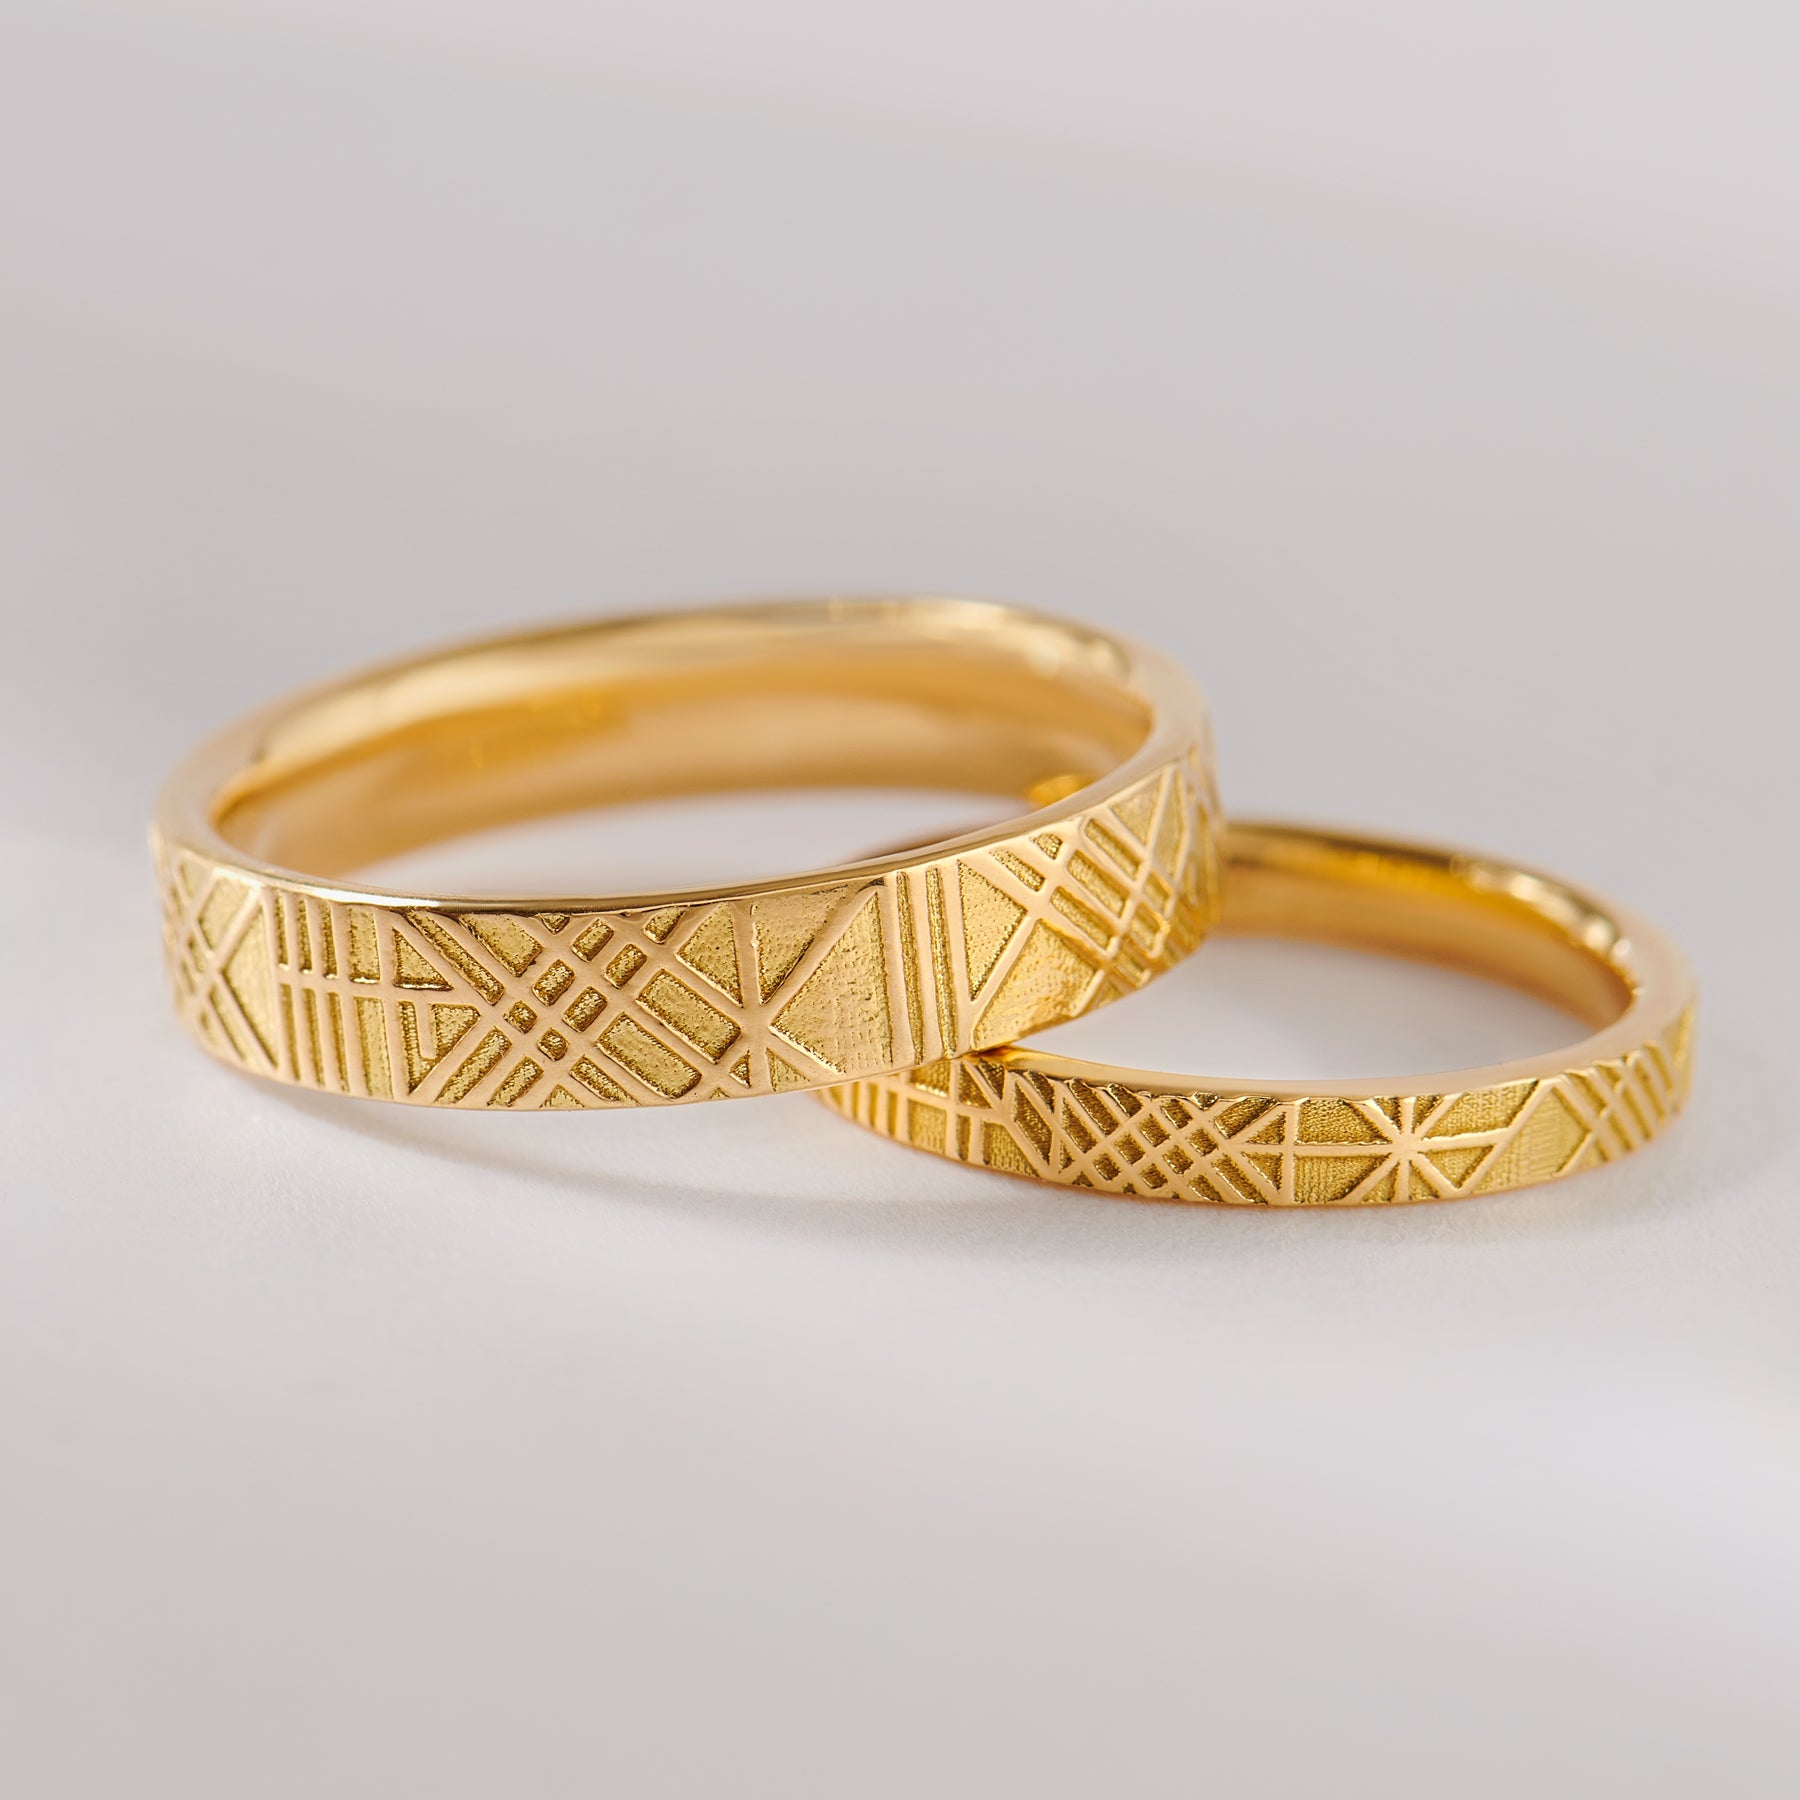 Gift Idea For Valentines Day |GRT Gold Shopping |Gold Ring, 58% OFF